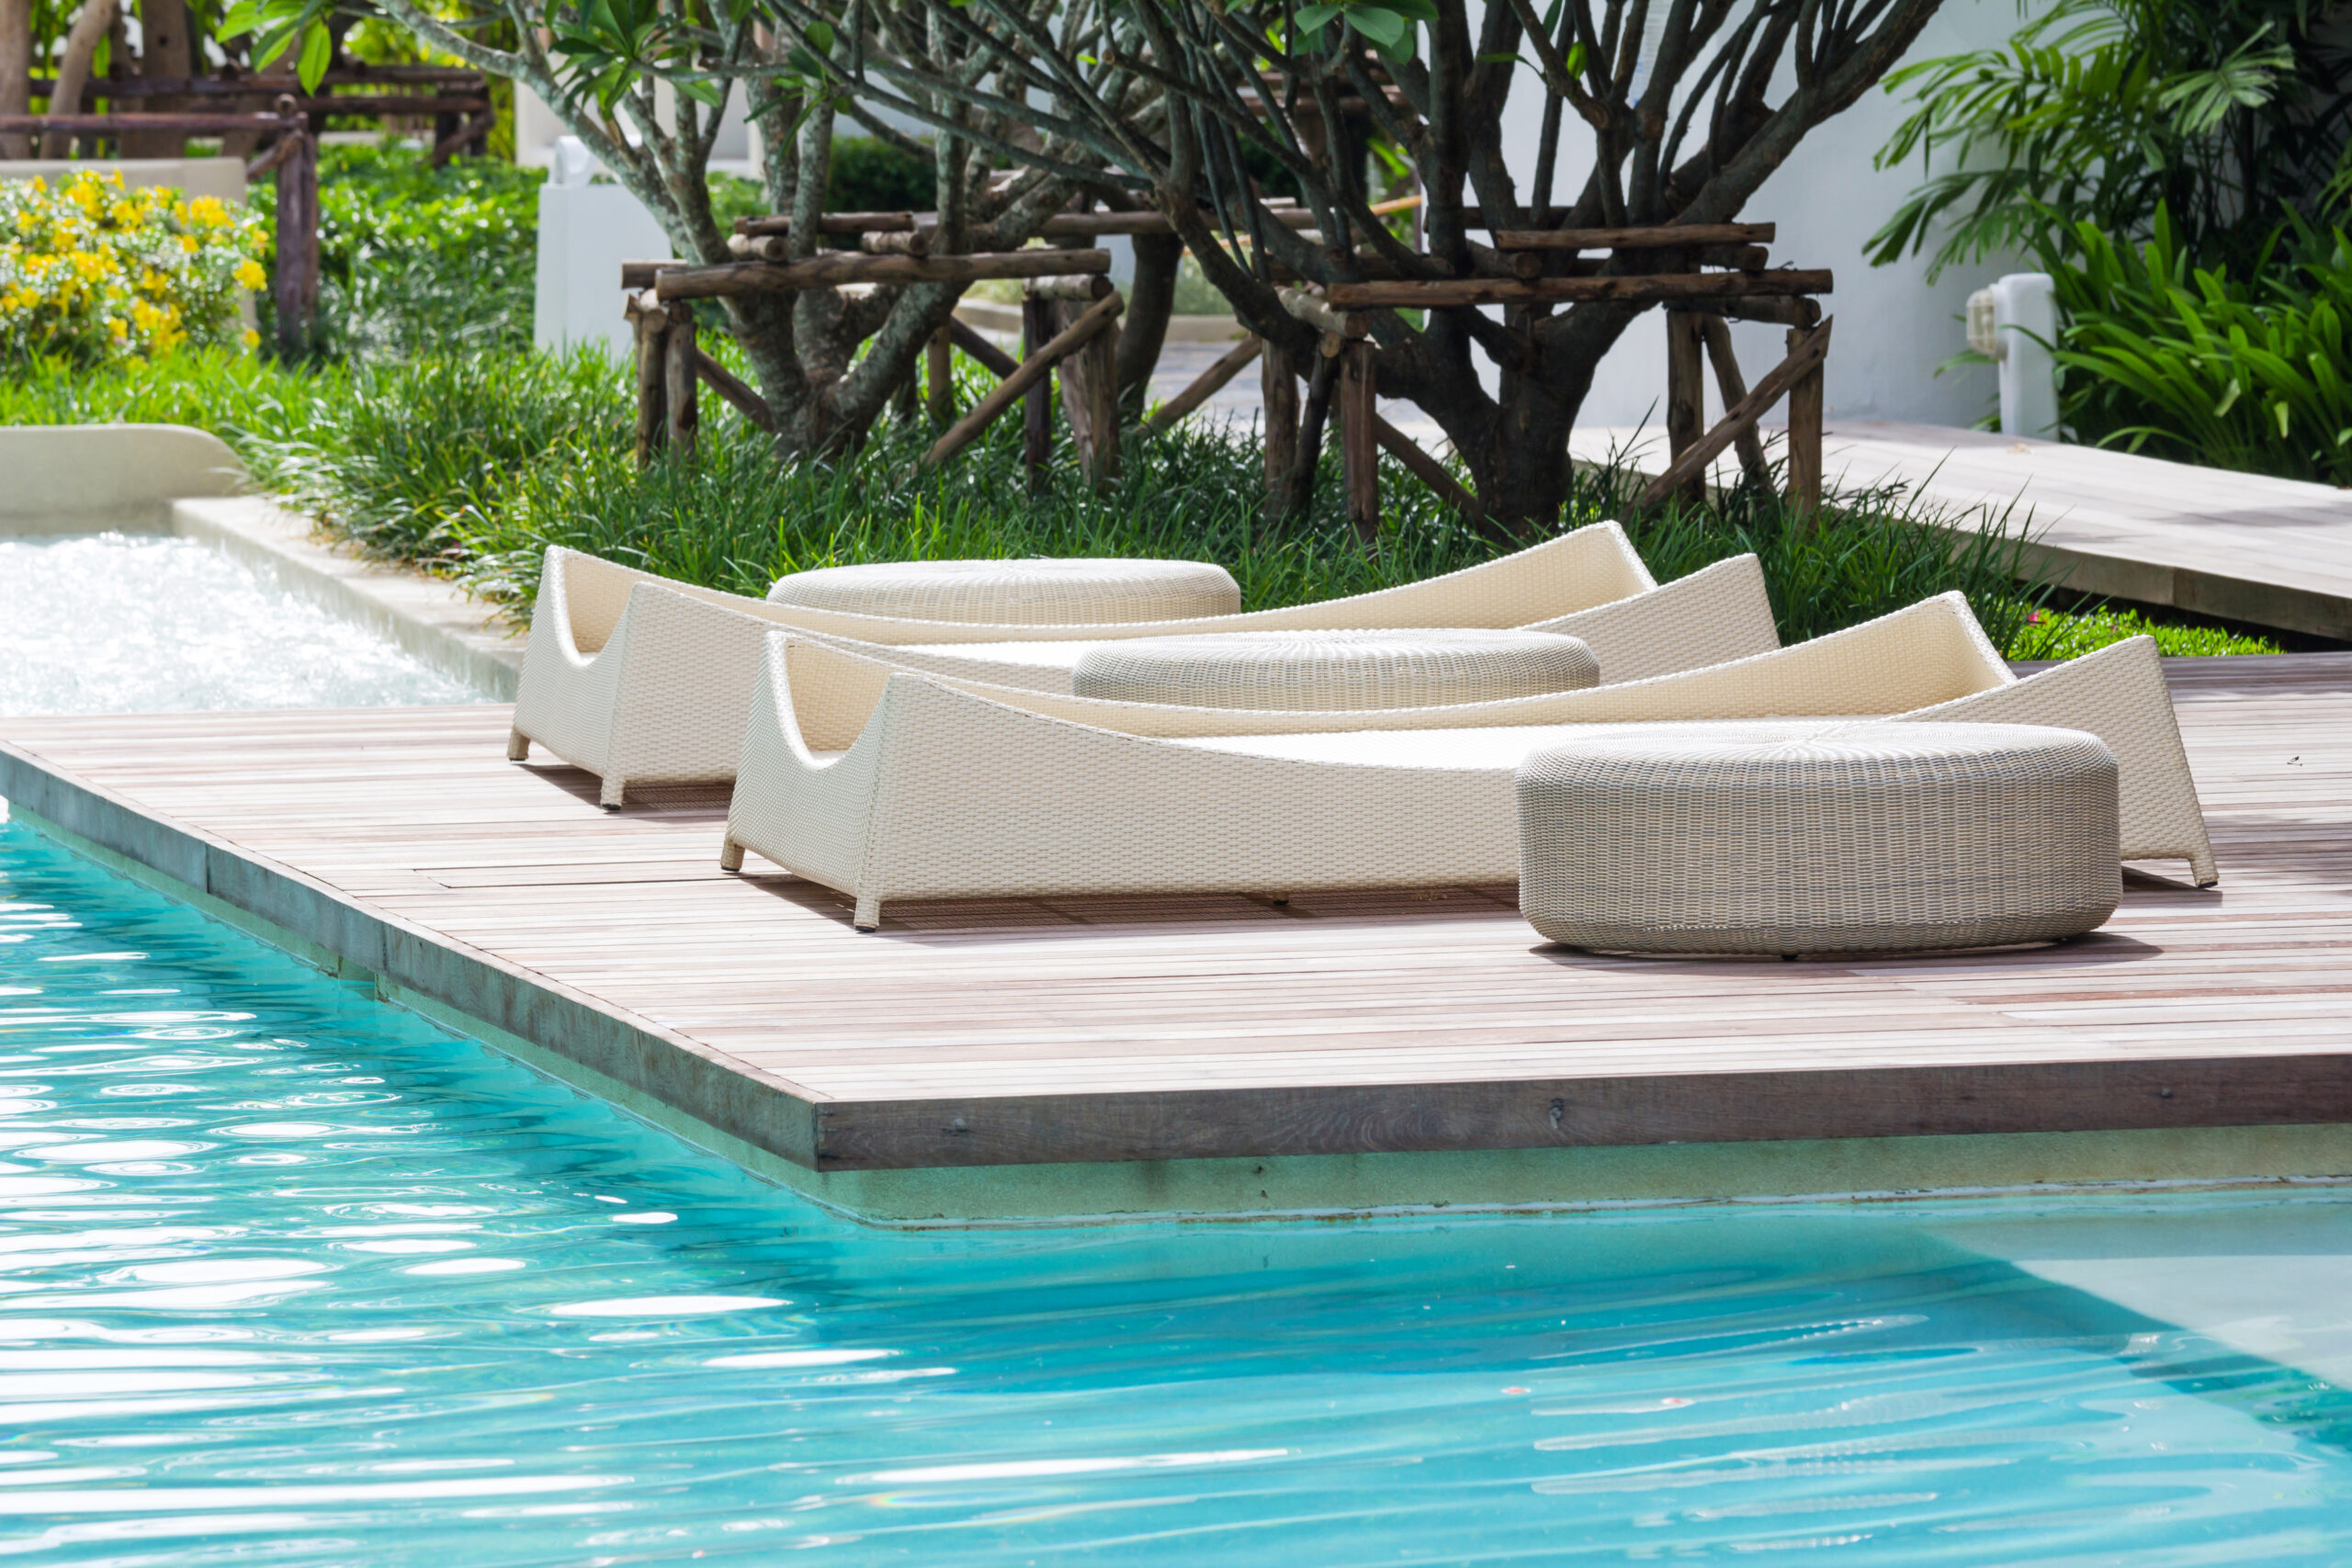 White chairs and lounge beds arranged by the pool, offering comfortable seating and relaxation options for poolside guests.